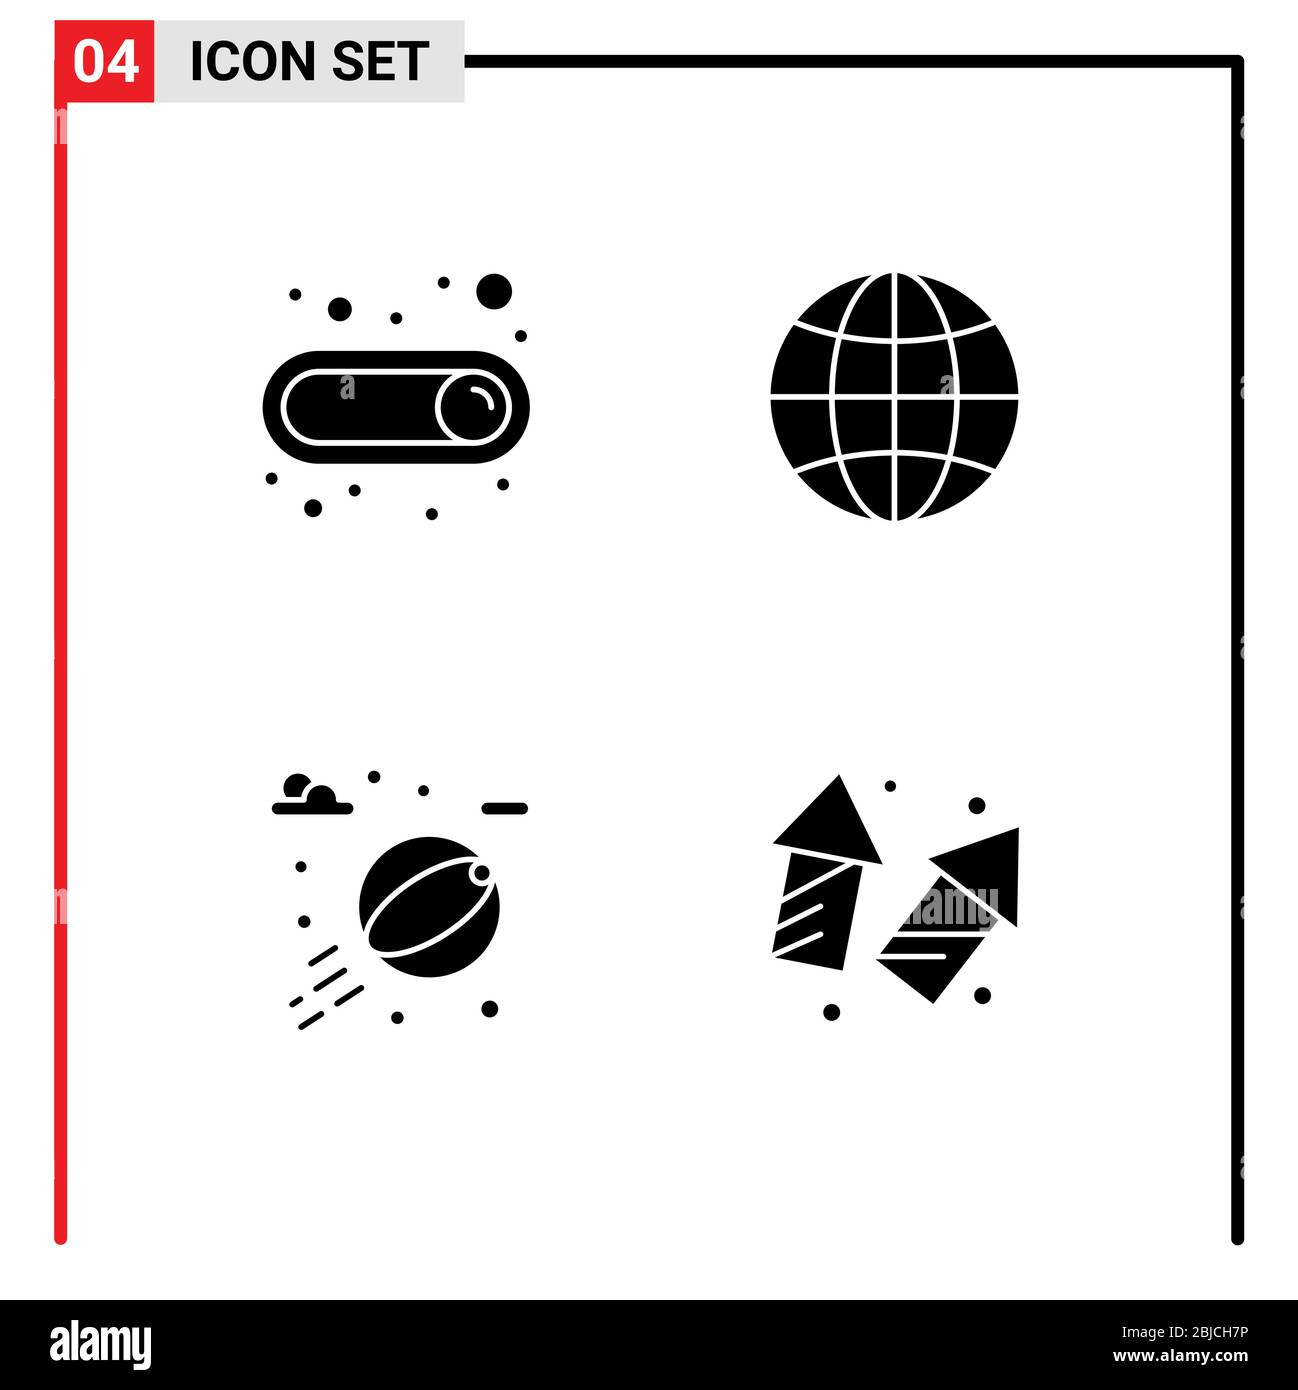 Universal Icon Symbols Group of 4 Modern Solid Glyphs of on, water, globe, web, celebrate Editable Vector Design Elements Stock Vector